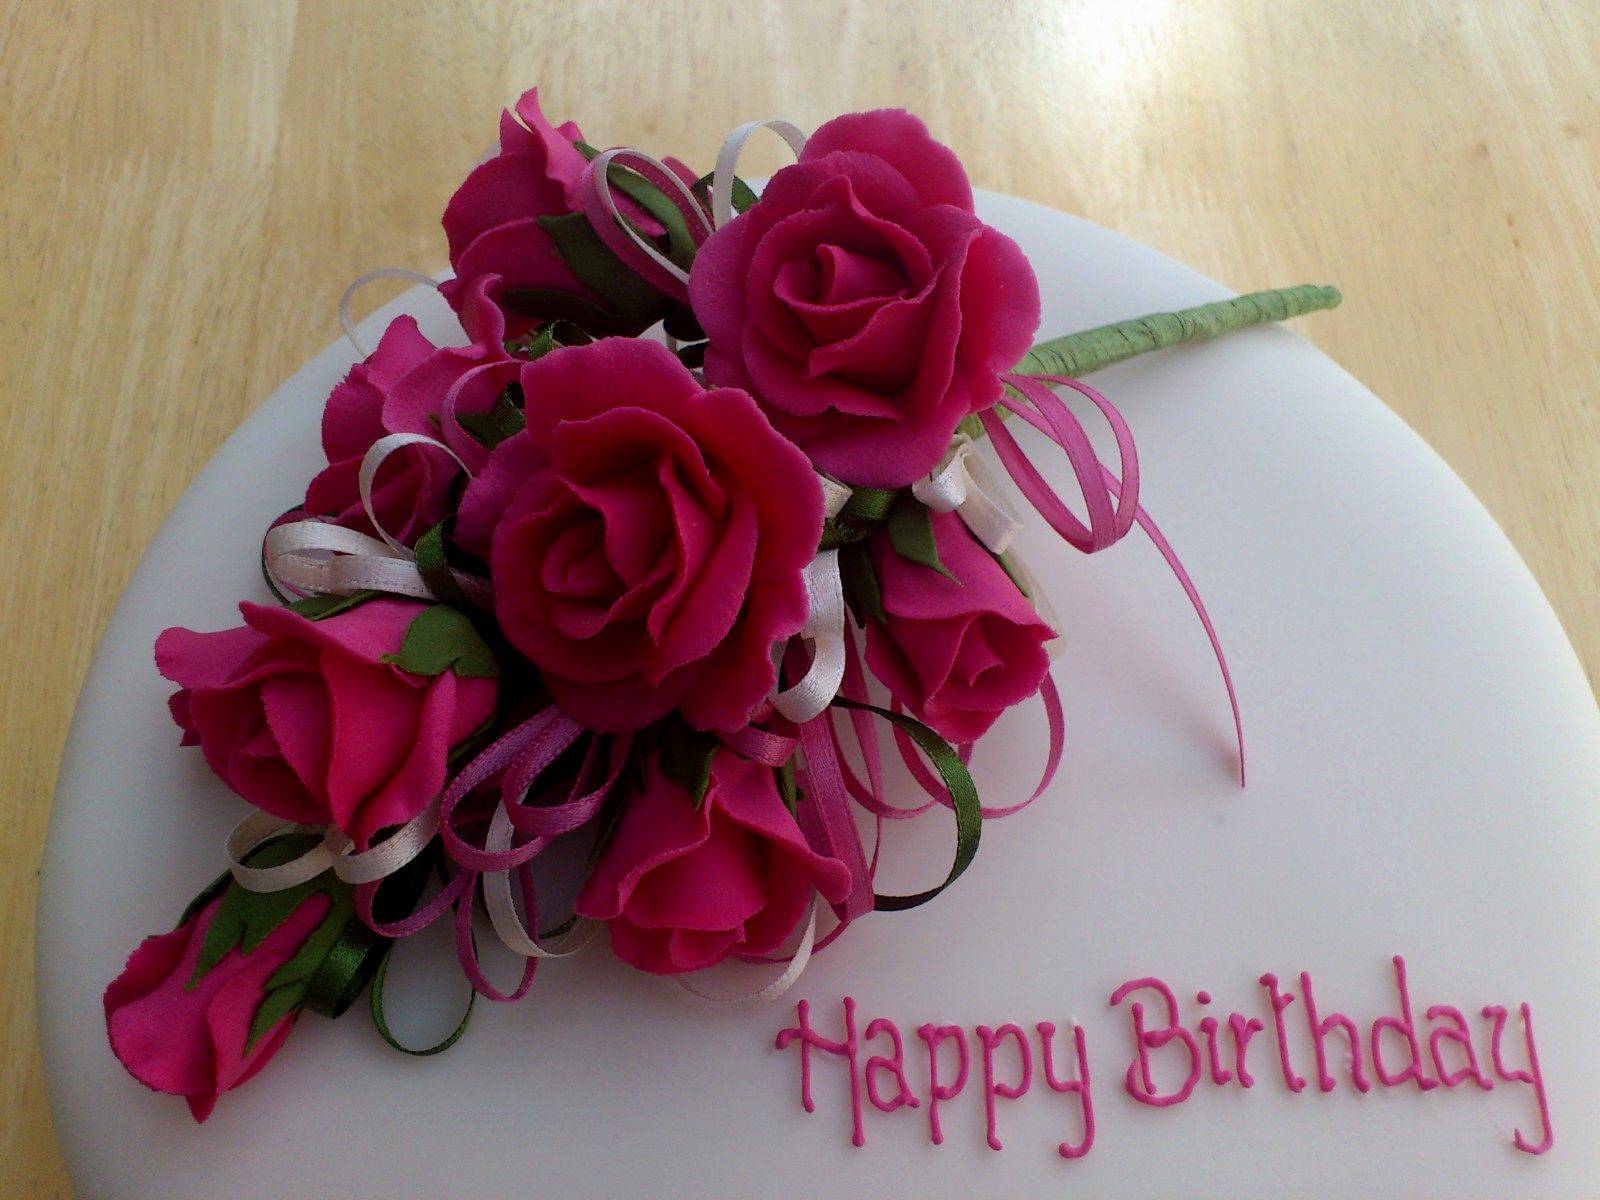 Happy Birthday Cake with Pink Roses